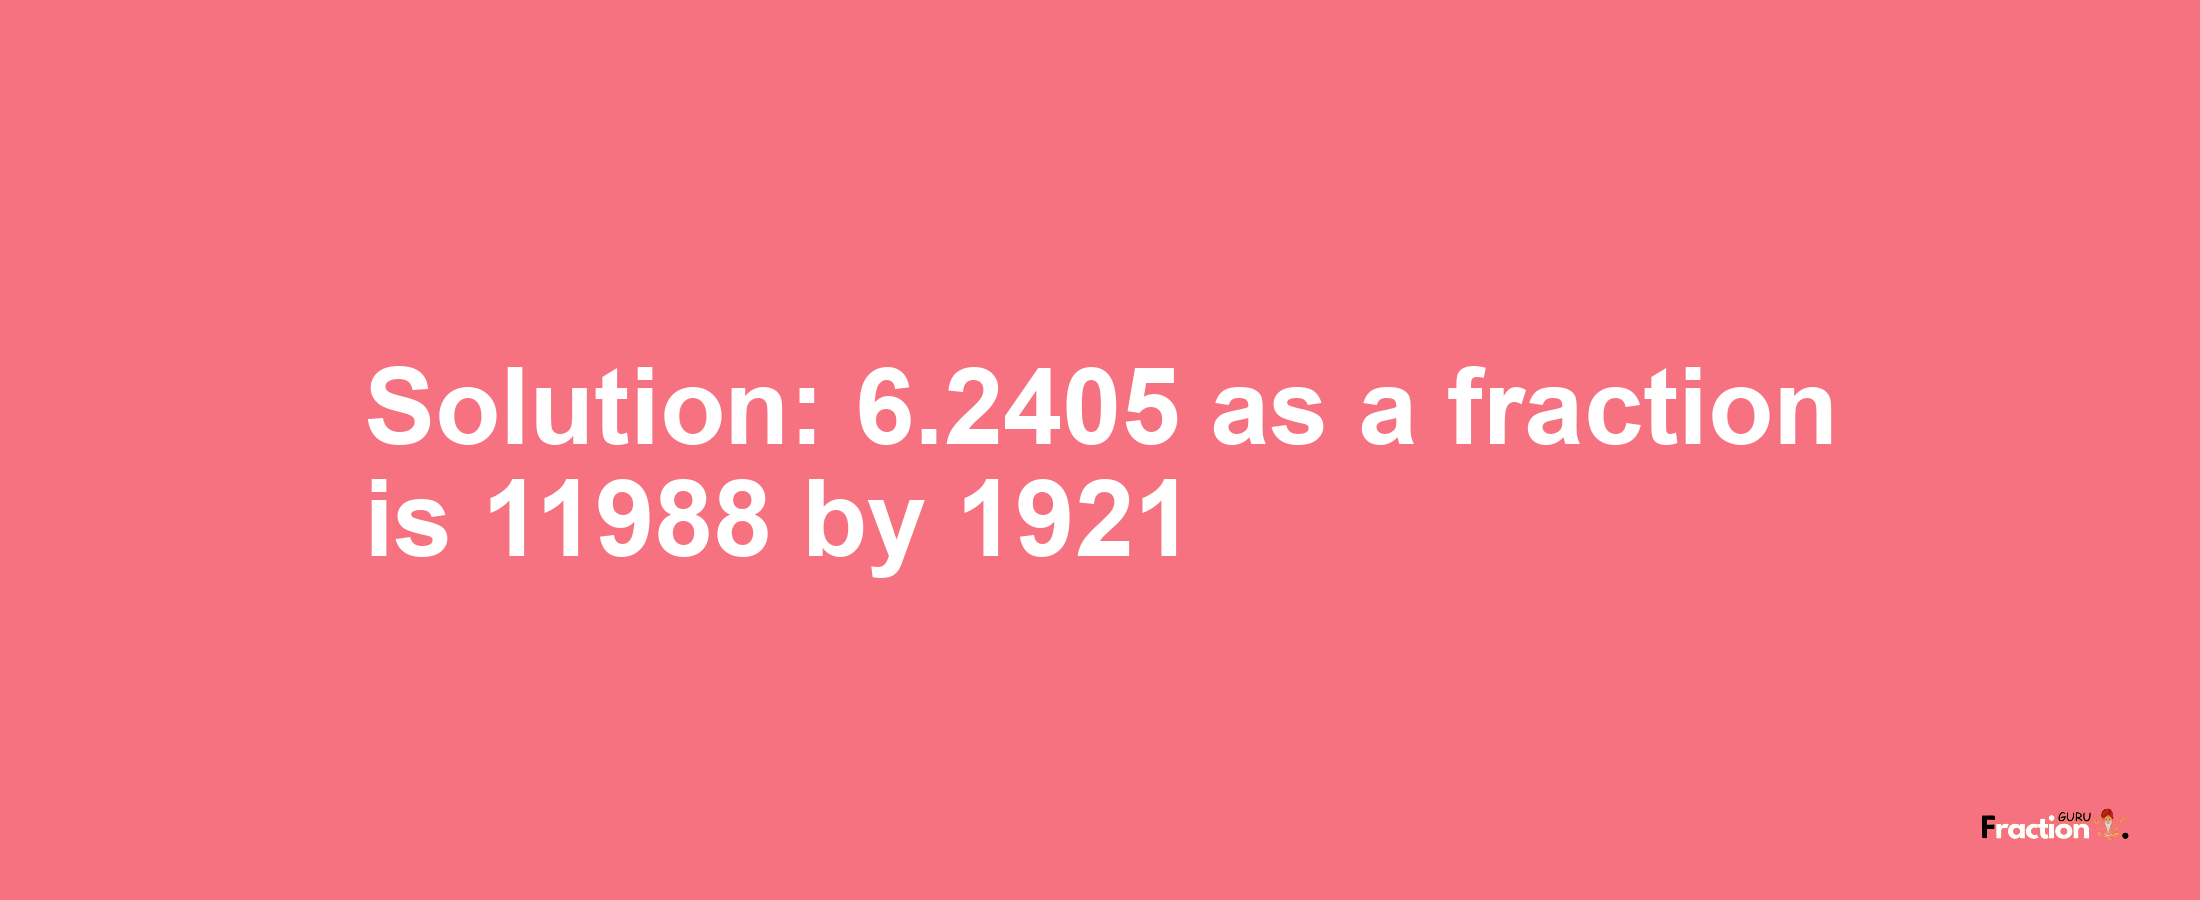 Solution:6.2405 as a fraction is 11988/1921